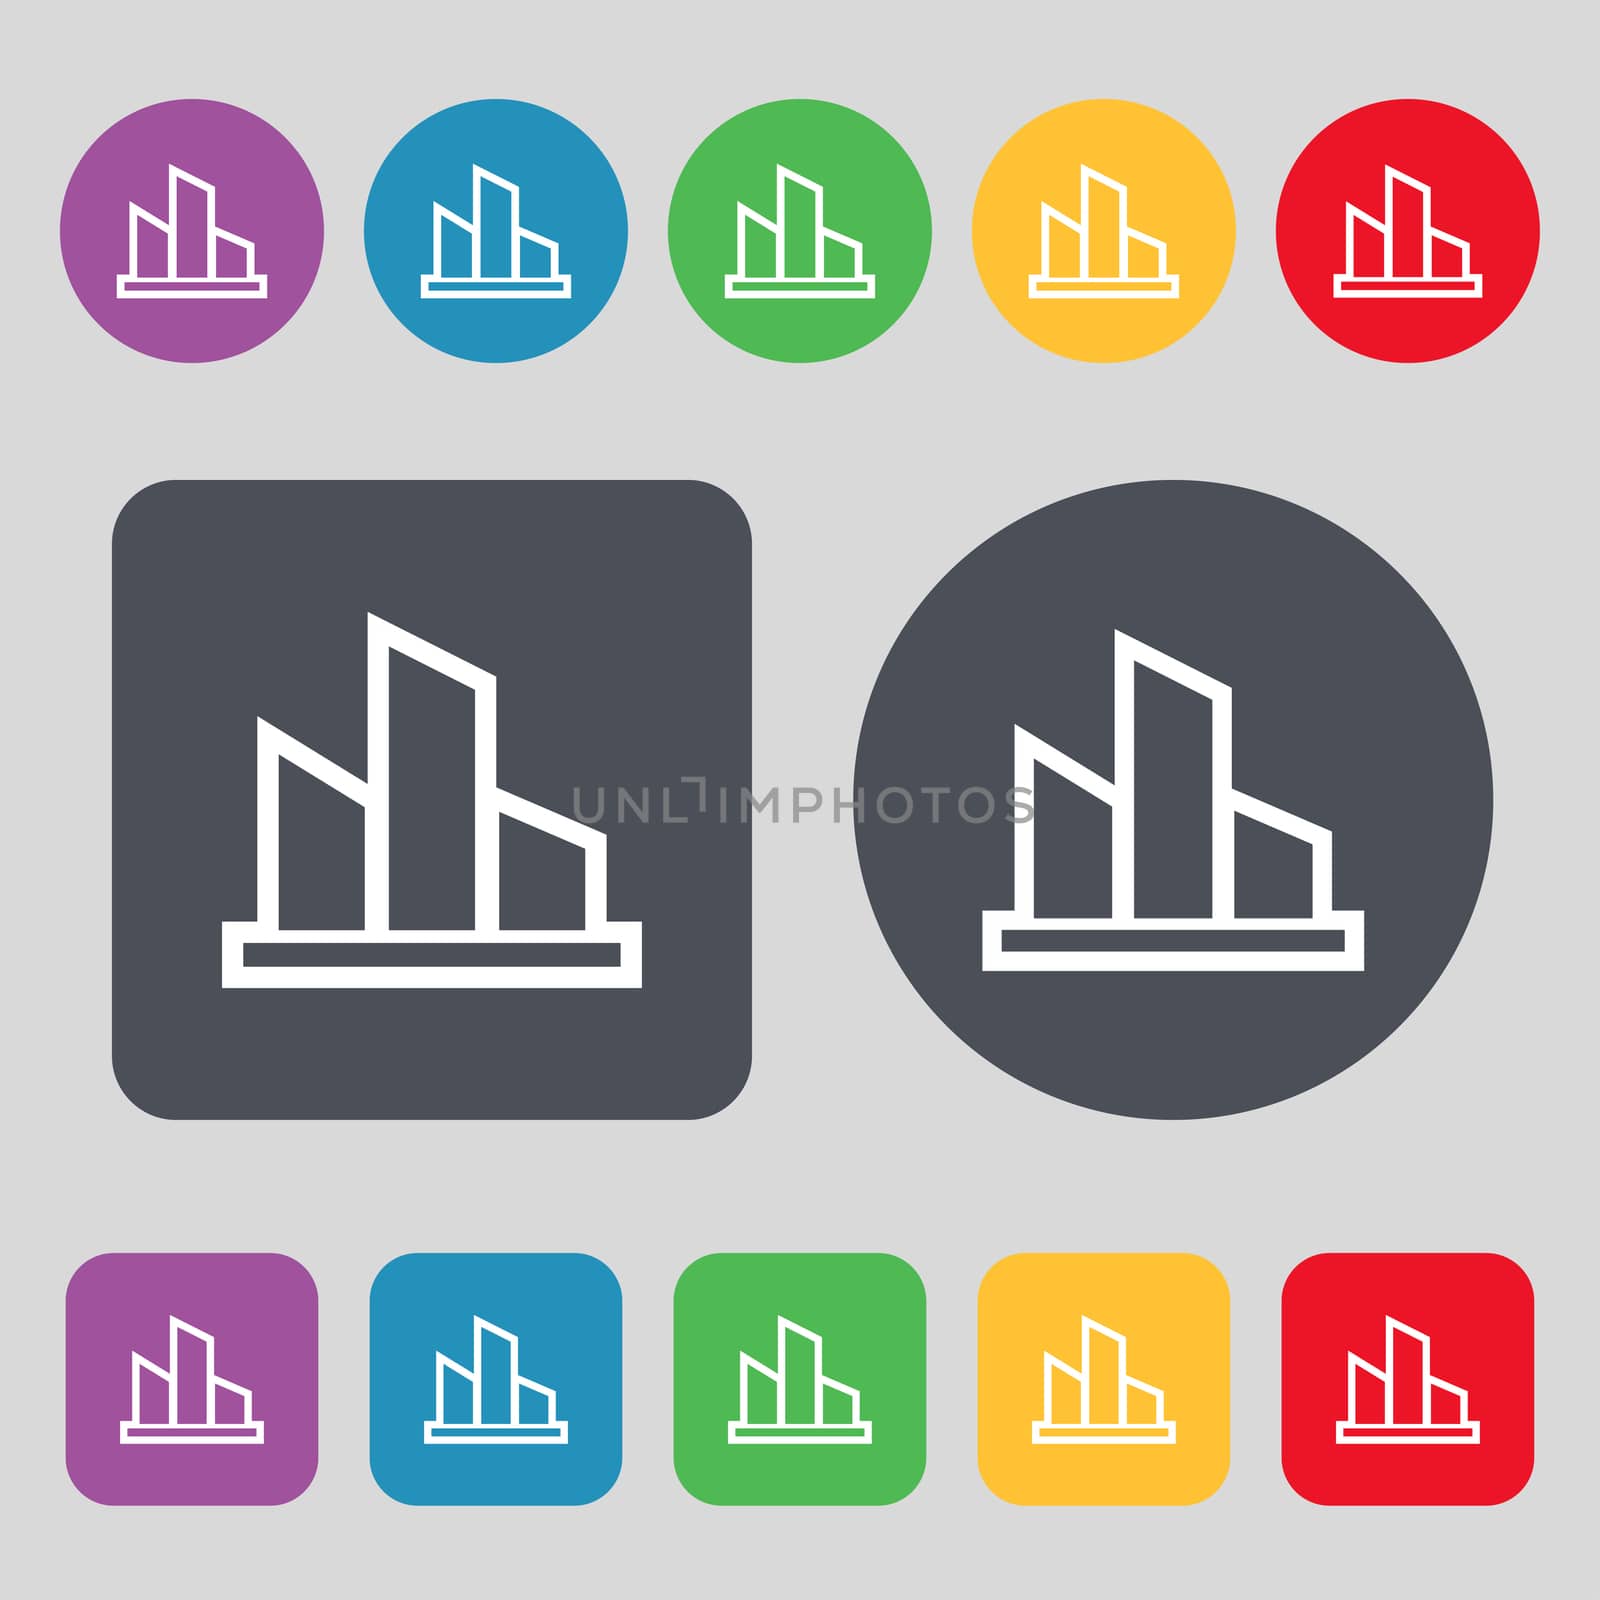 Diagram icon sign. A set of 12 colored buttons. Flat design. illustration